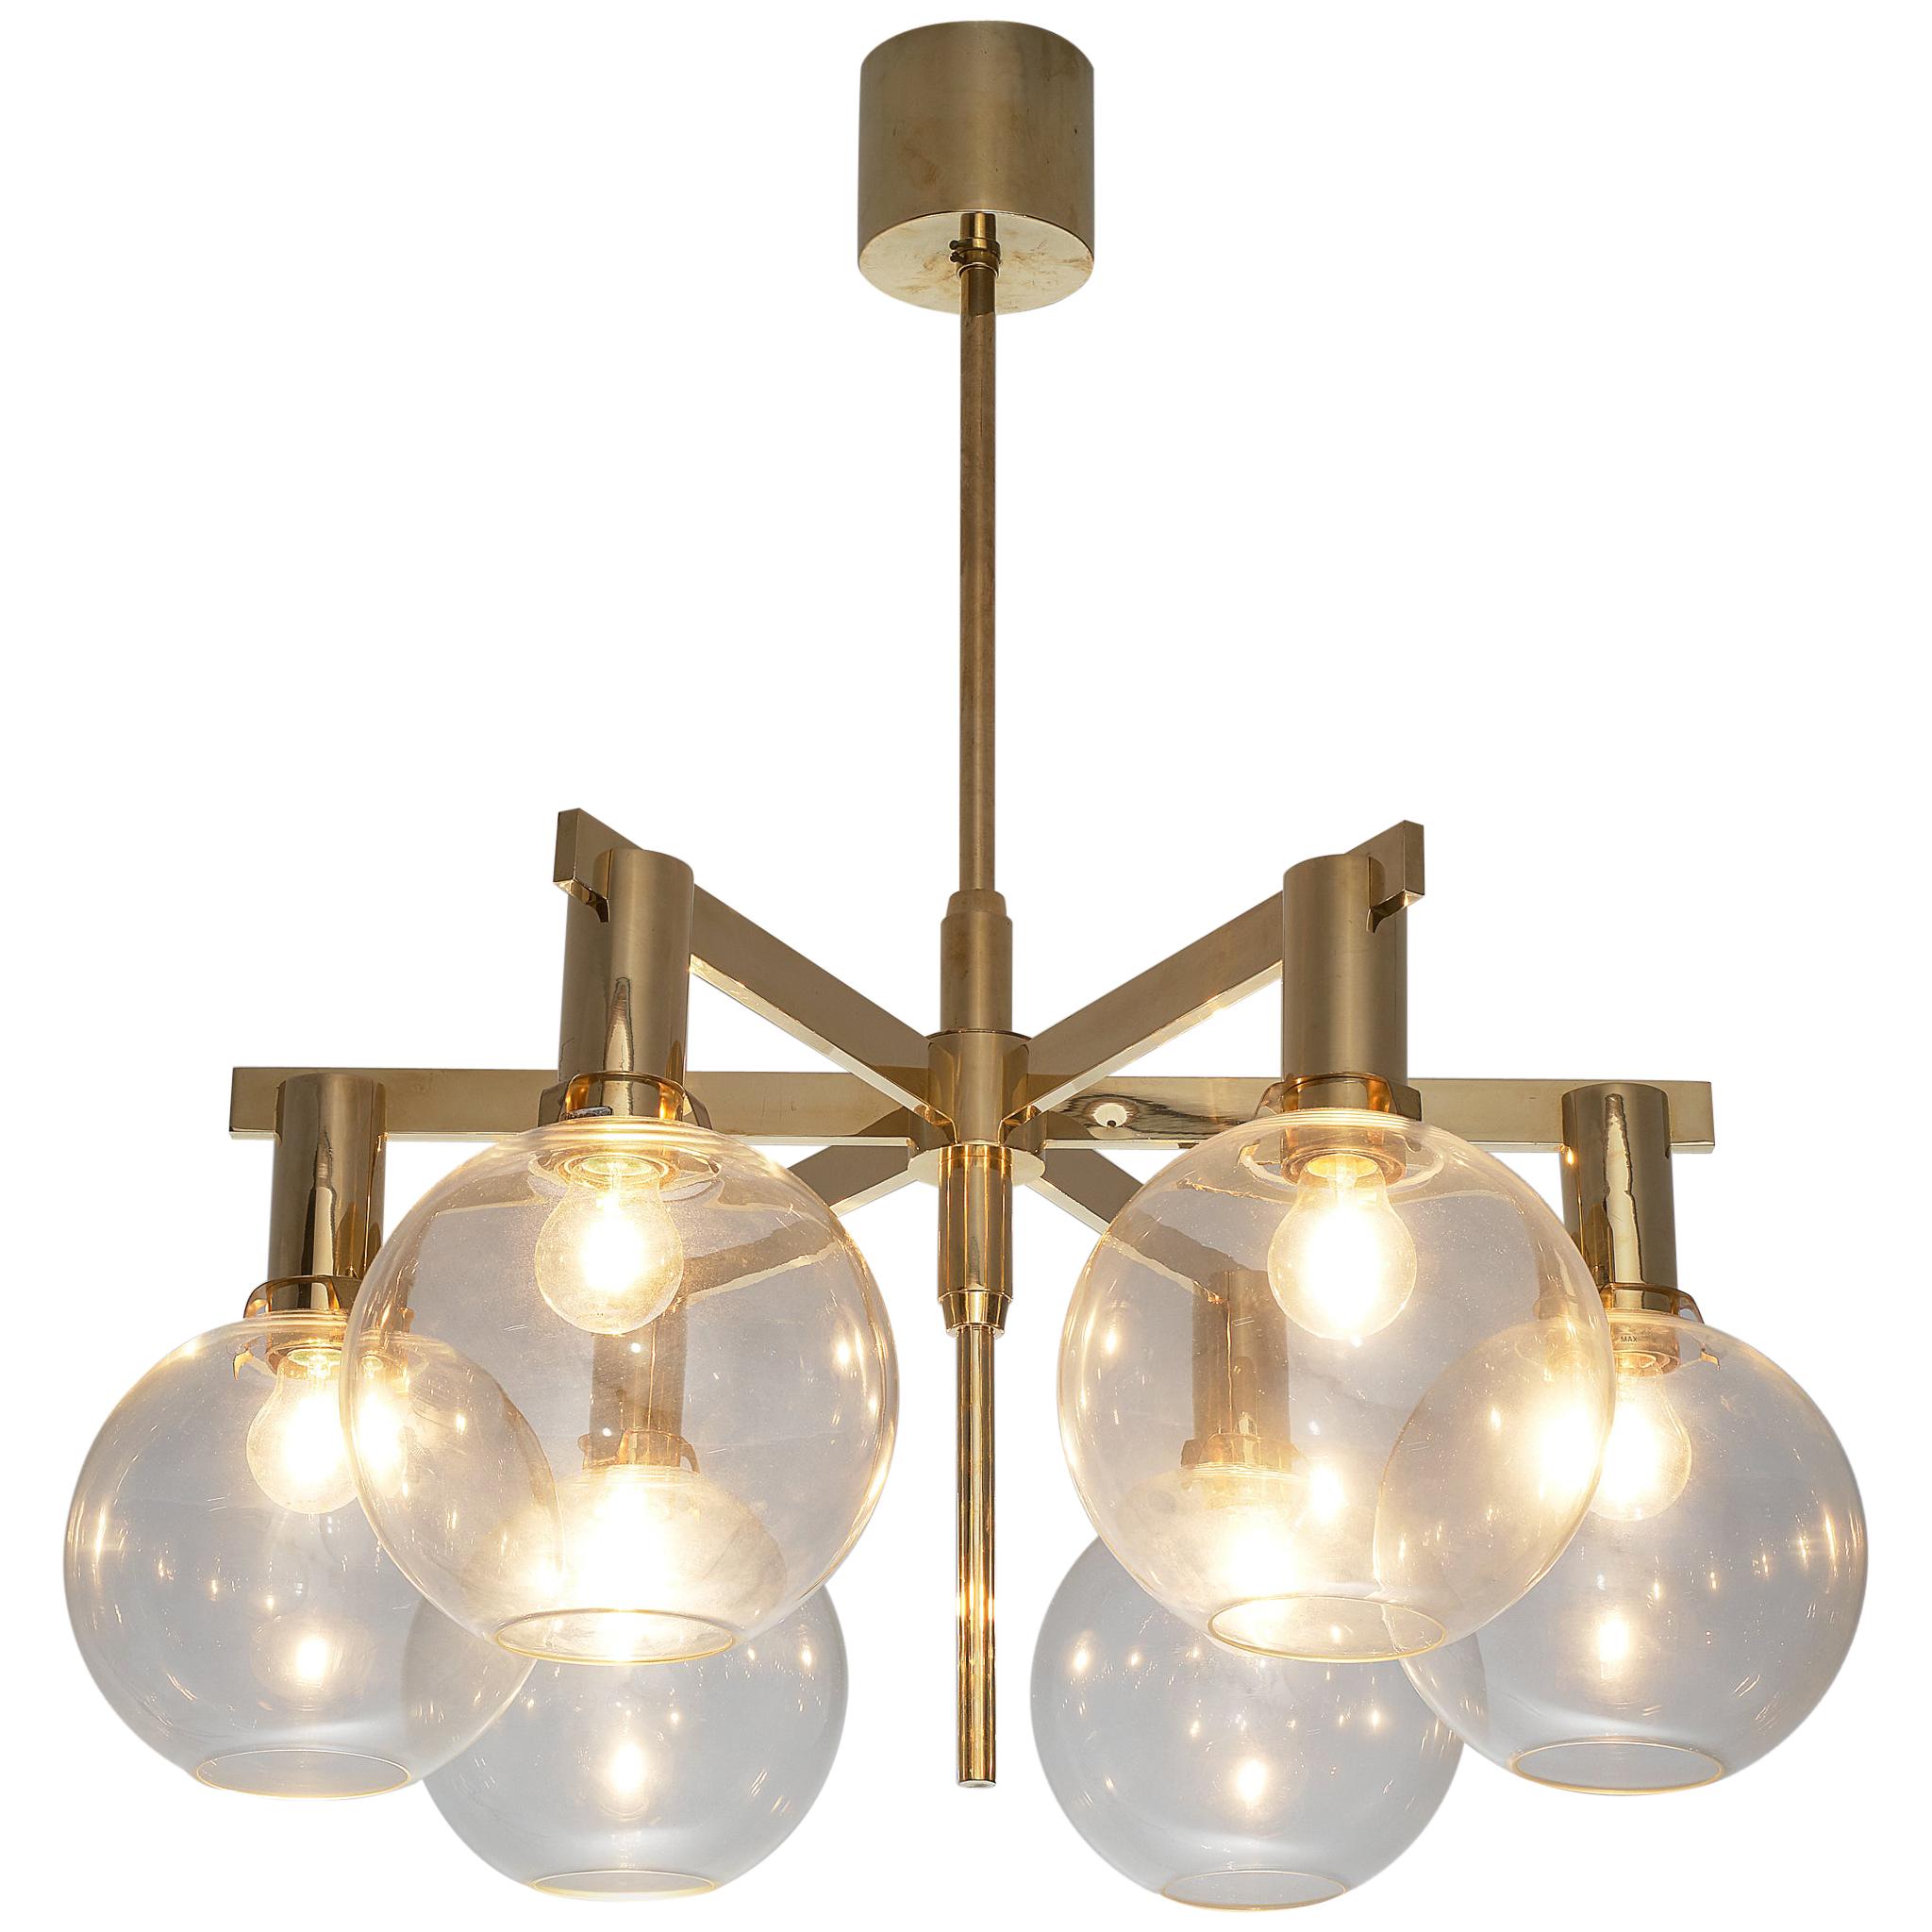 Hans-Agne Jakobsson 'Pastoral' Chandelier in Glass and Brass